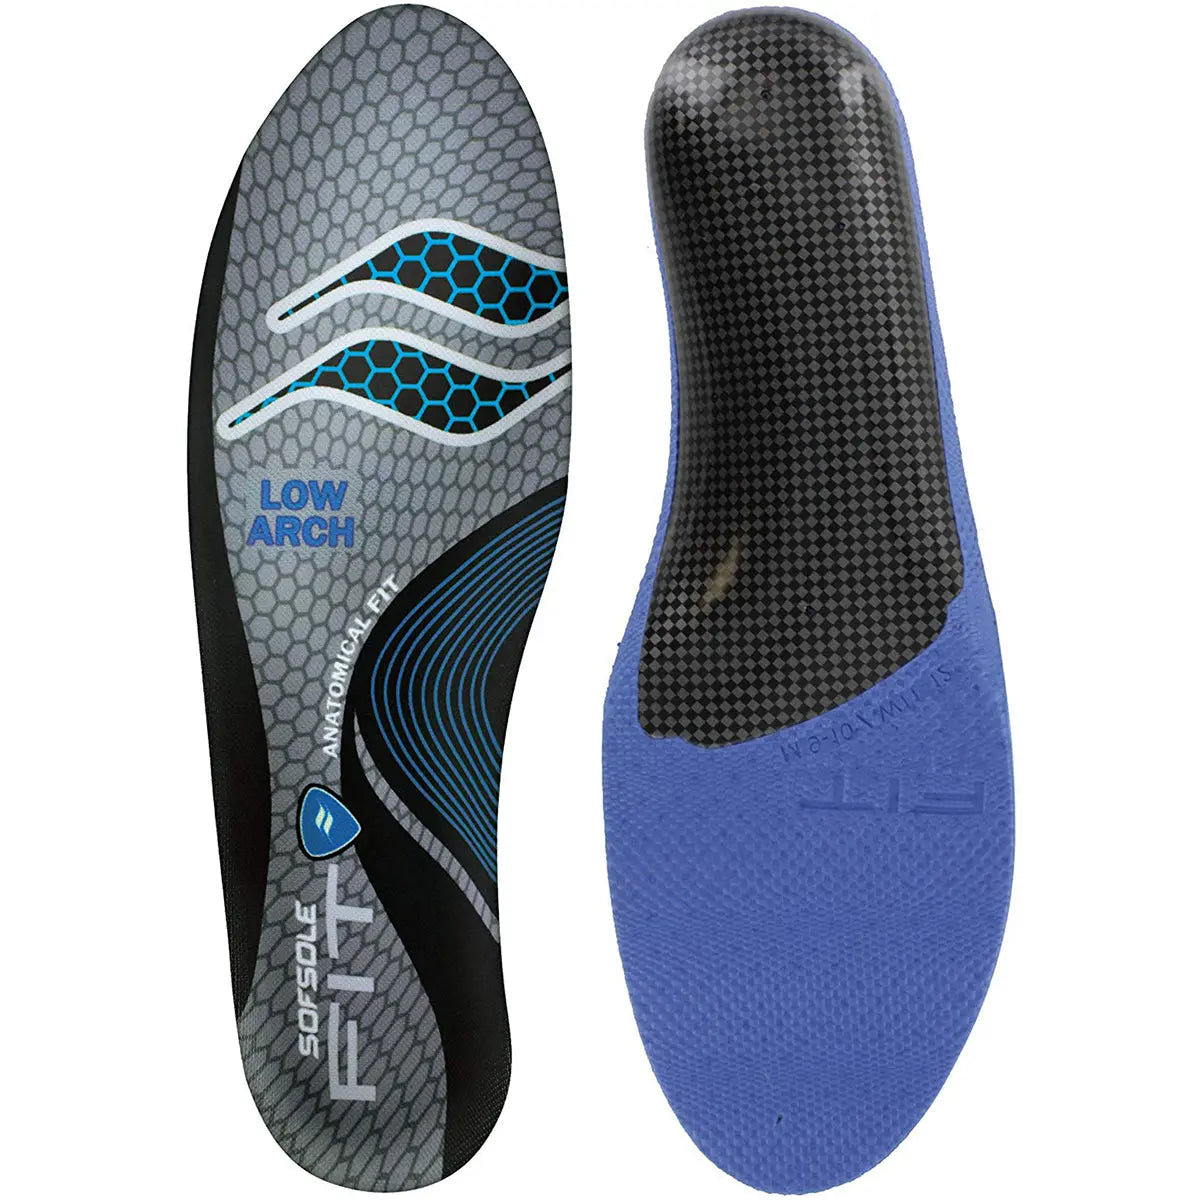 Sof Sole Fit Series Low Arch Shoe Insoles SofSole